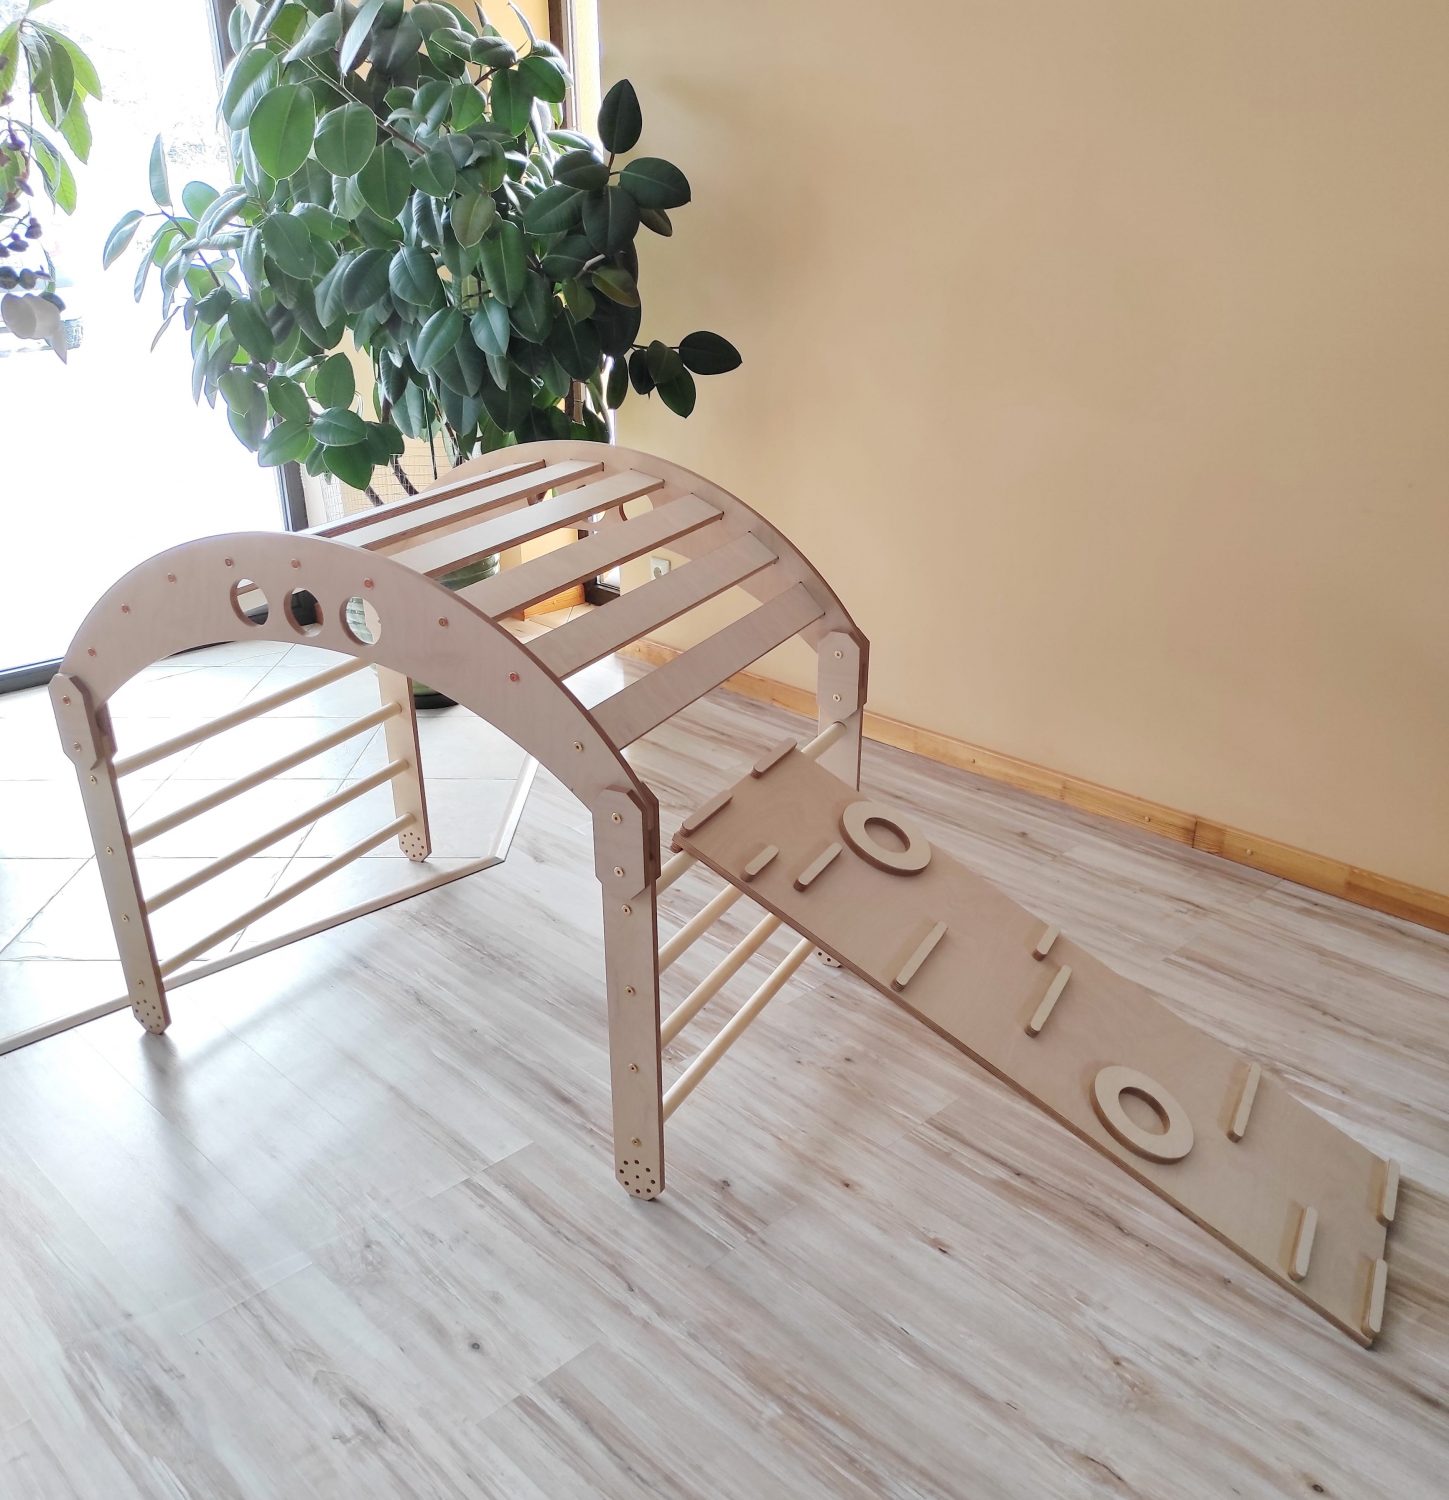 Childrens Pikler's Inspired Furniture by Luula